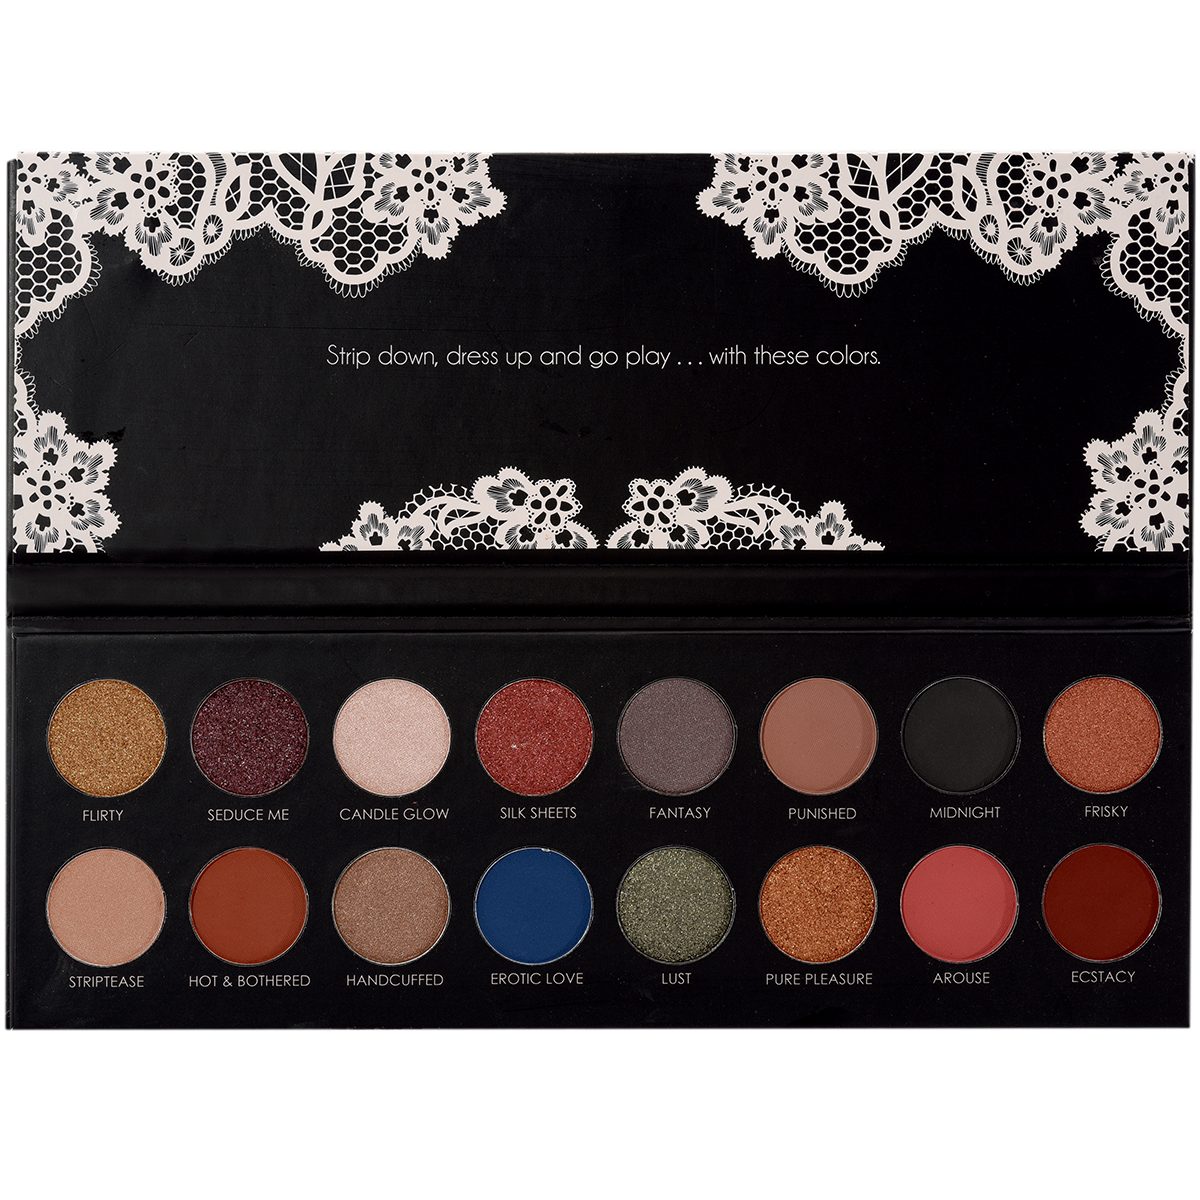 ITA-2016-2 : Sinfull Eyes-Role Play 16 Colors Palette 6 PC